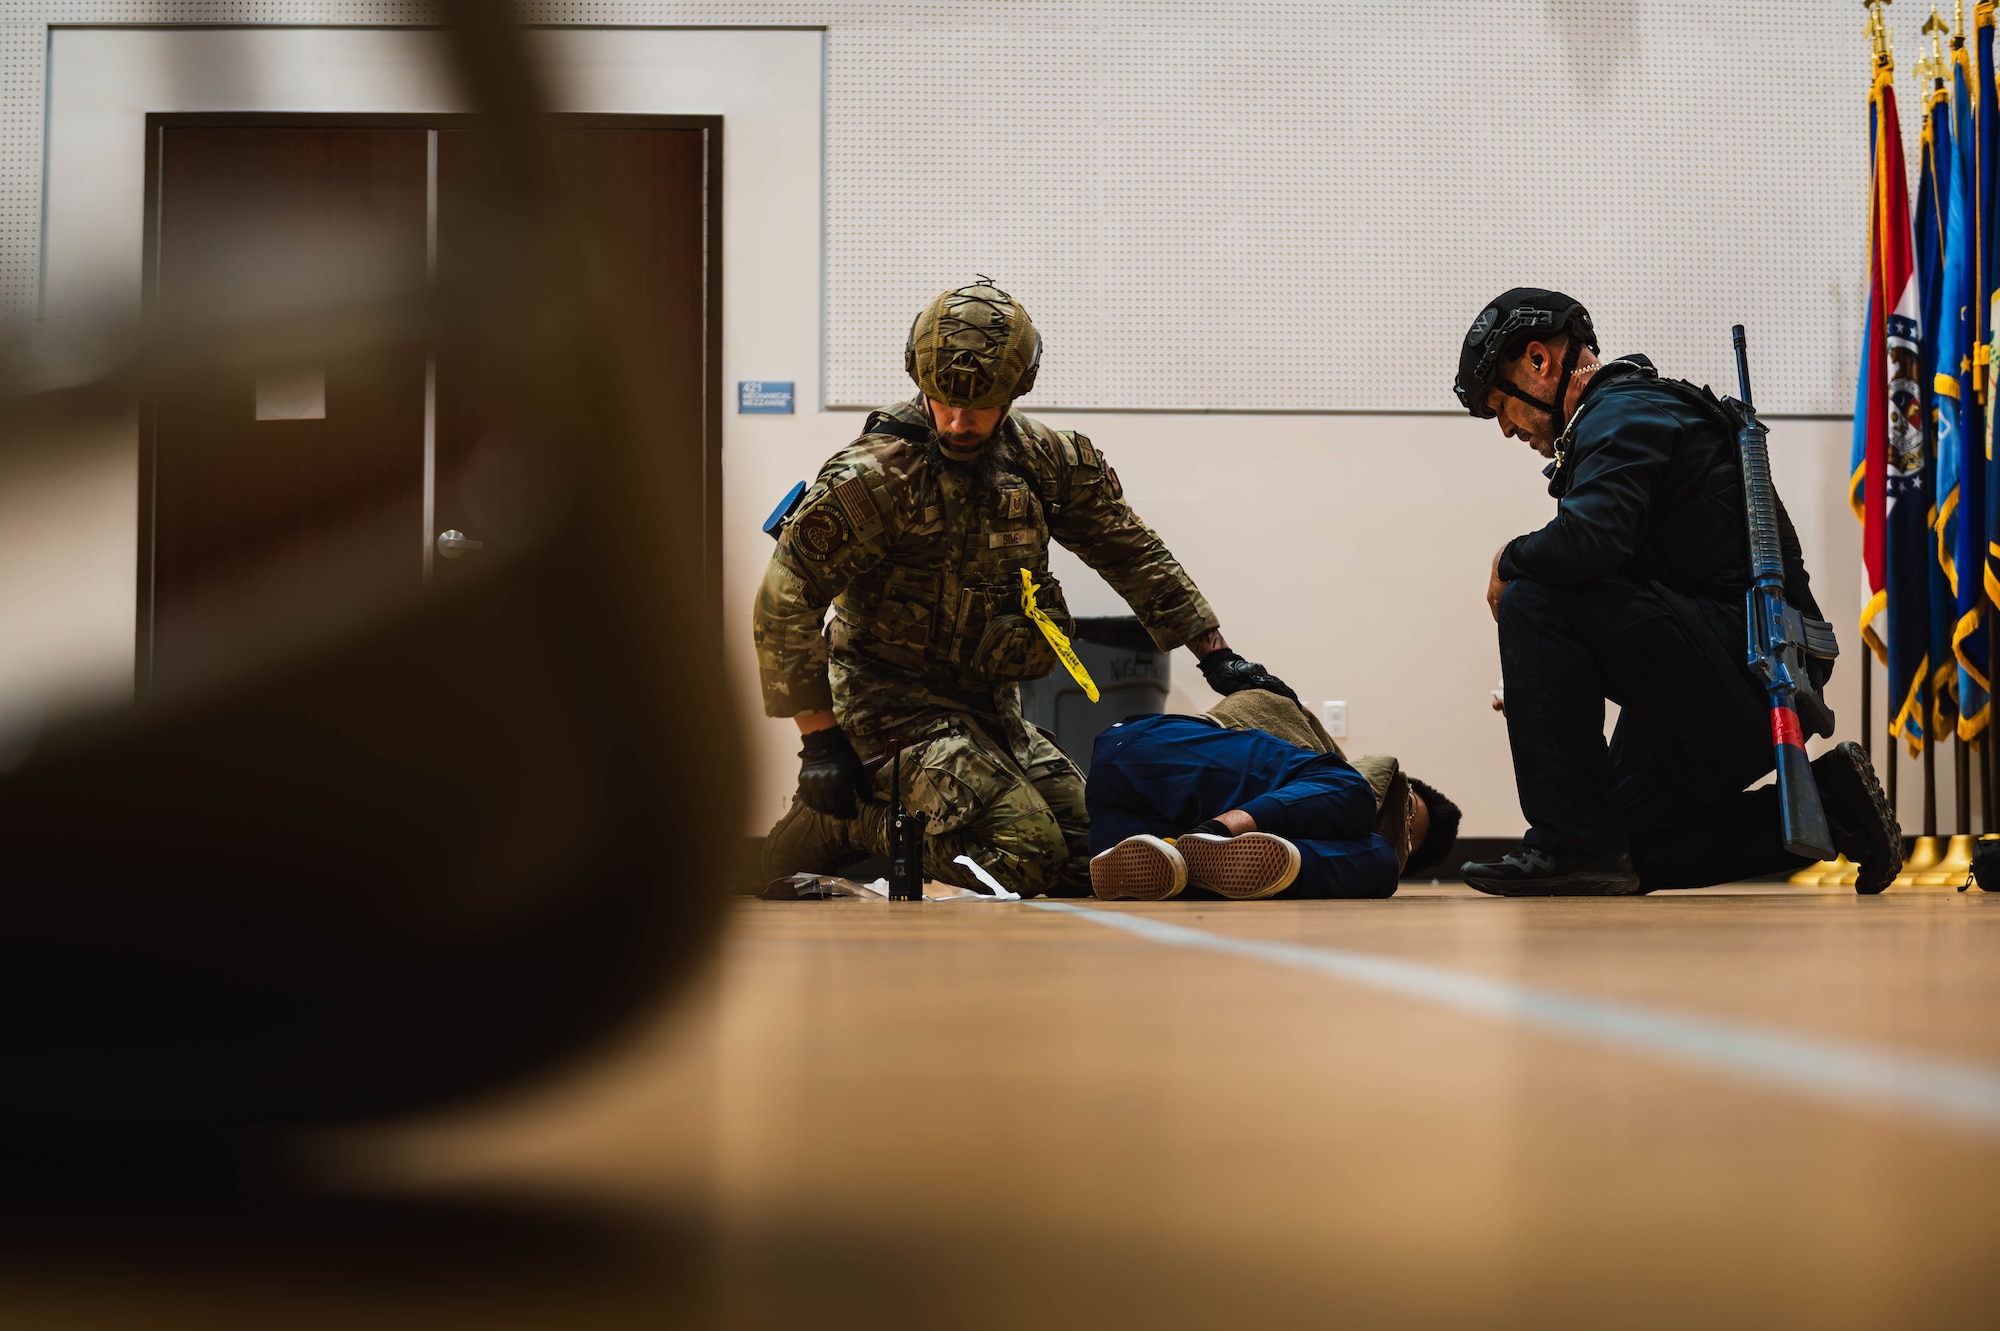 William Anderson (left), 56th Security Forces Squadron defender, and Tech Sgt. Jacob Sime (right), 56th SFS defender, perform a simulated emergency medical examination on a simulated injured victim during an active shooter exercise.